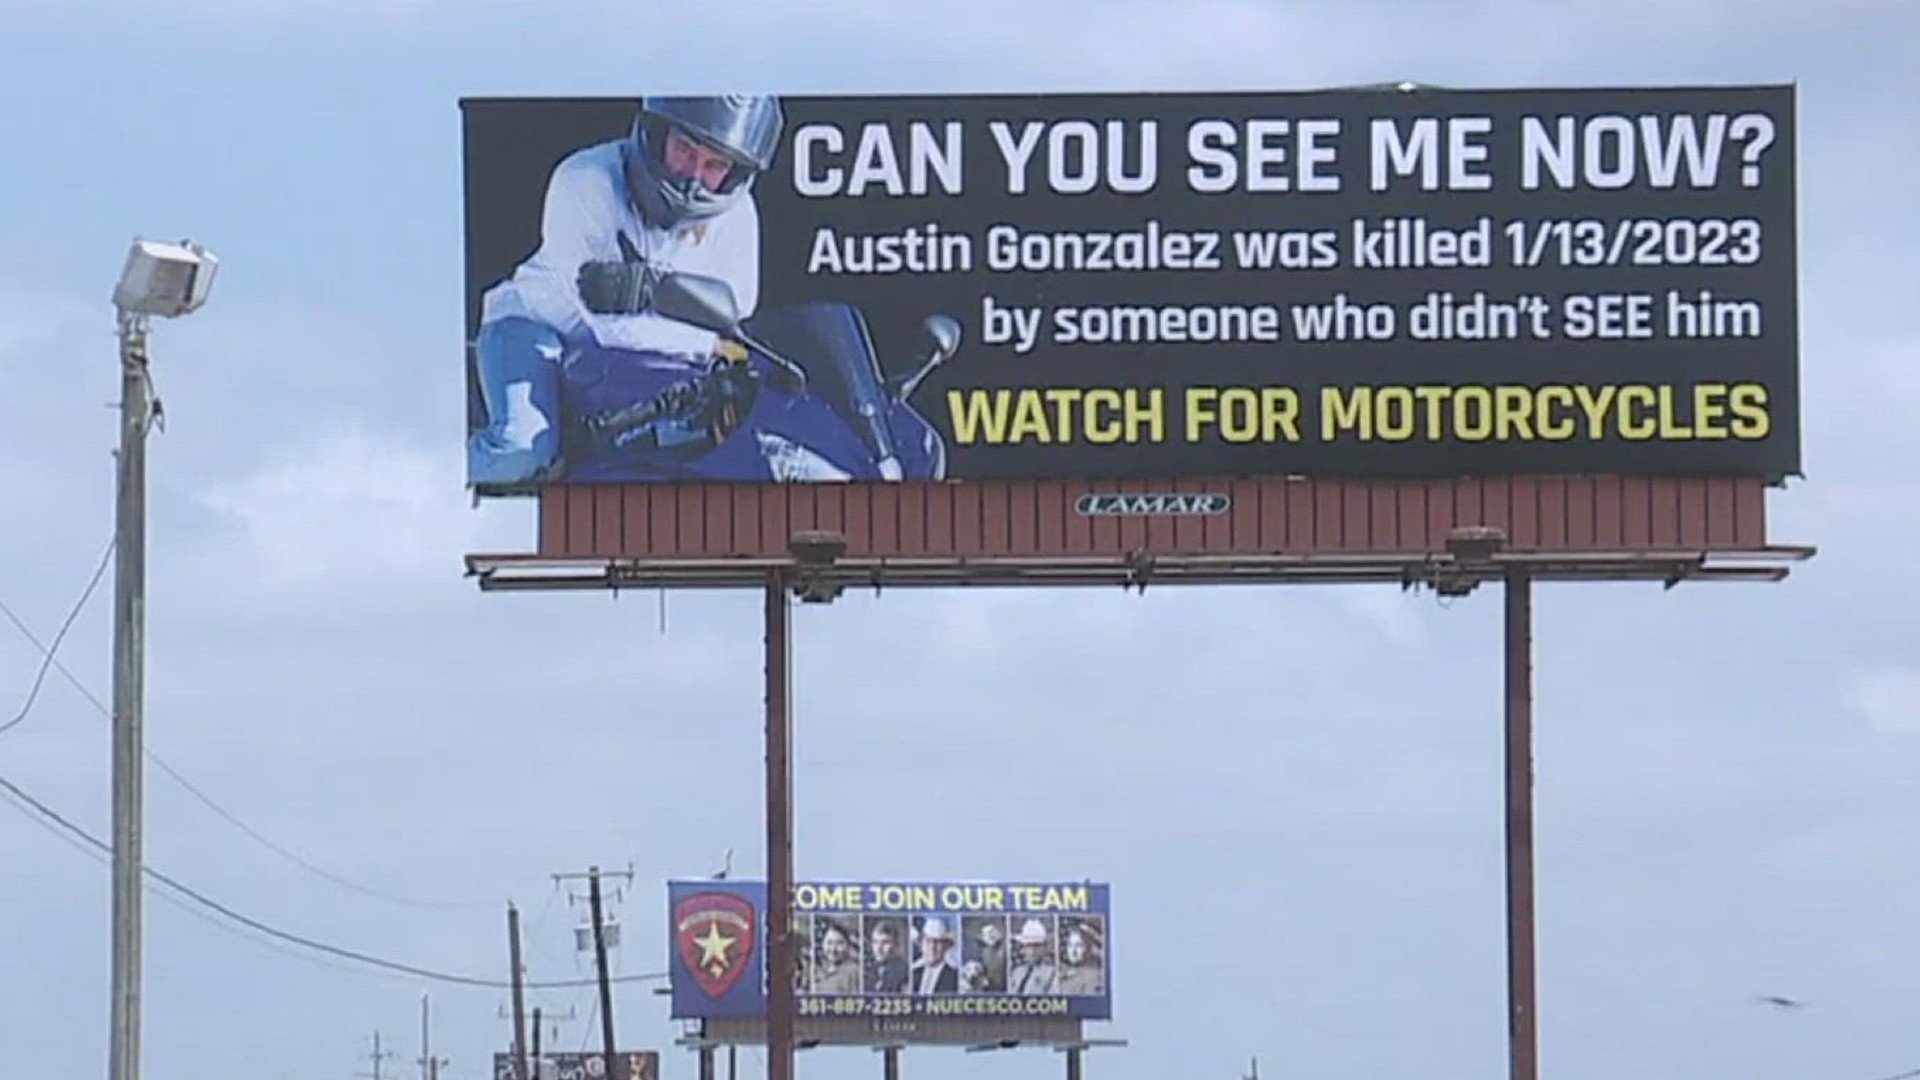 Since his passing, Austin's family has worked relentlessly to build motorcycle awareness by placing signs with his memory across the city.